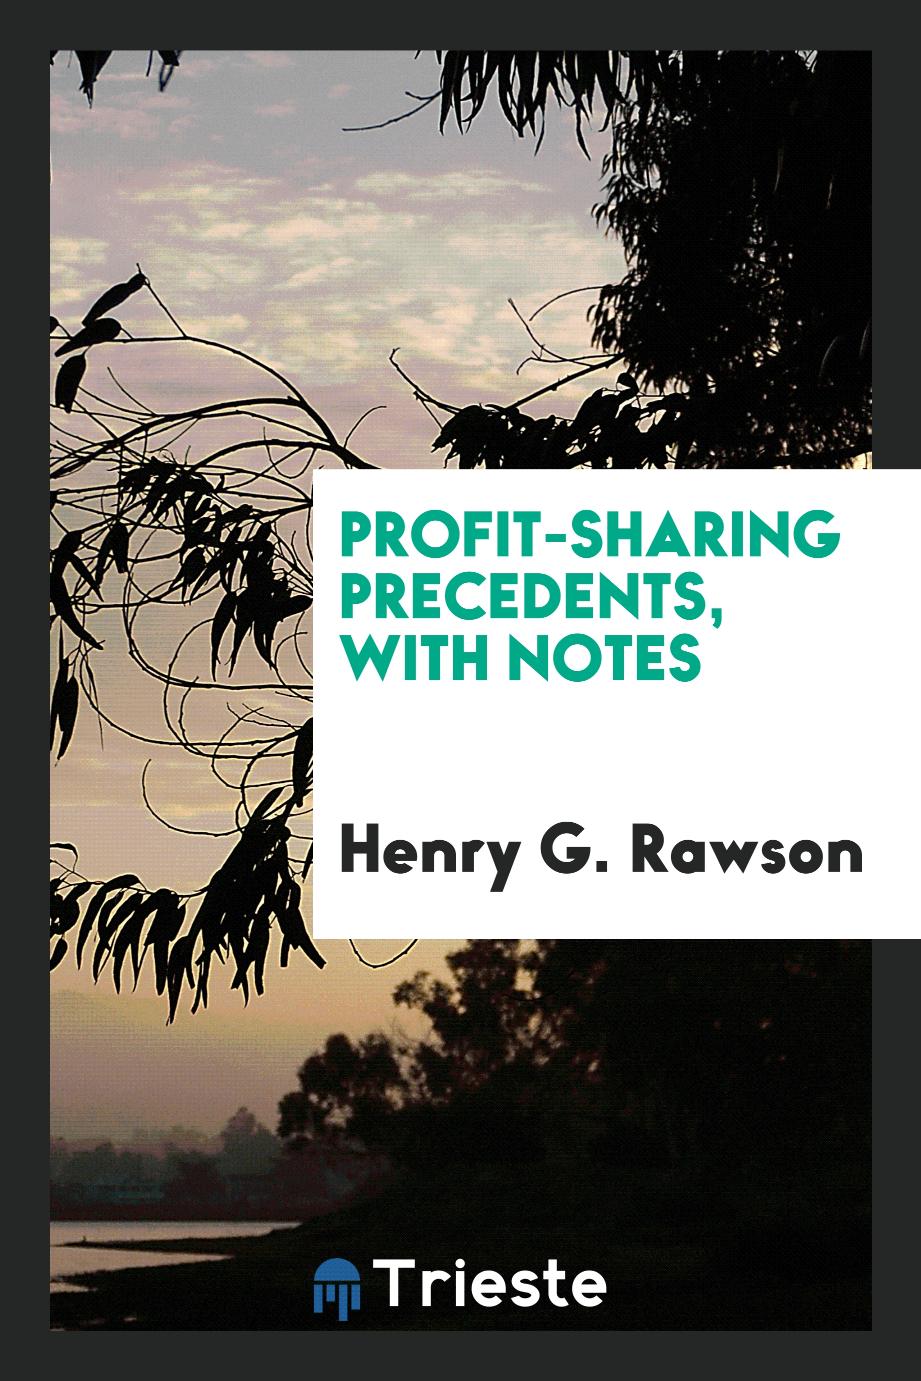 Profit-sharing precedents, with notes